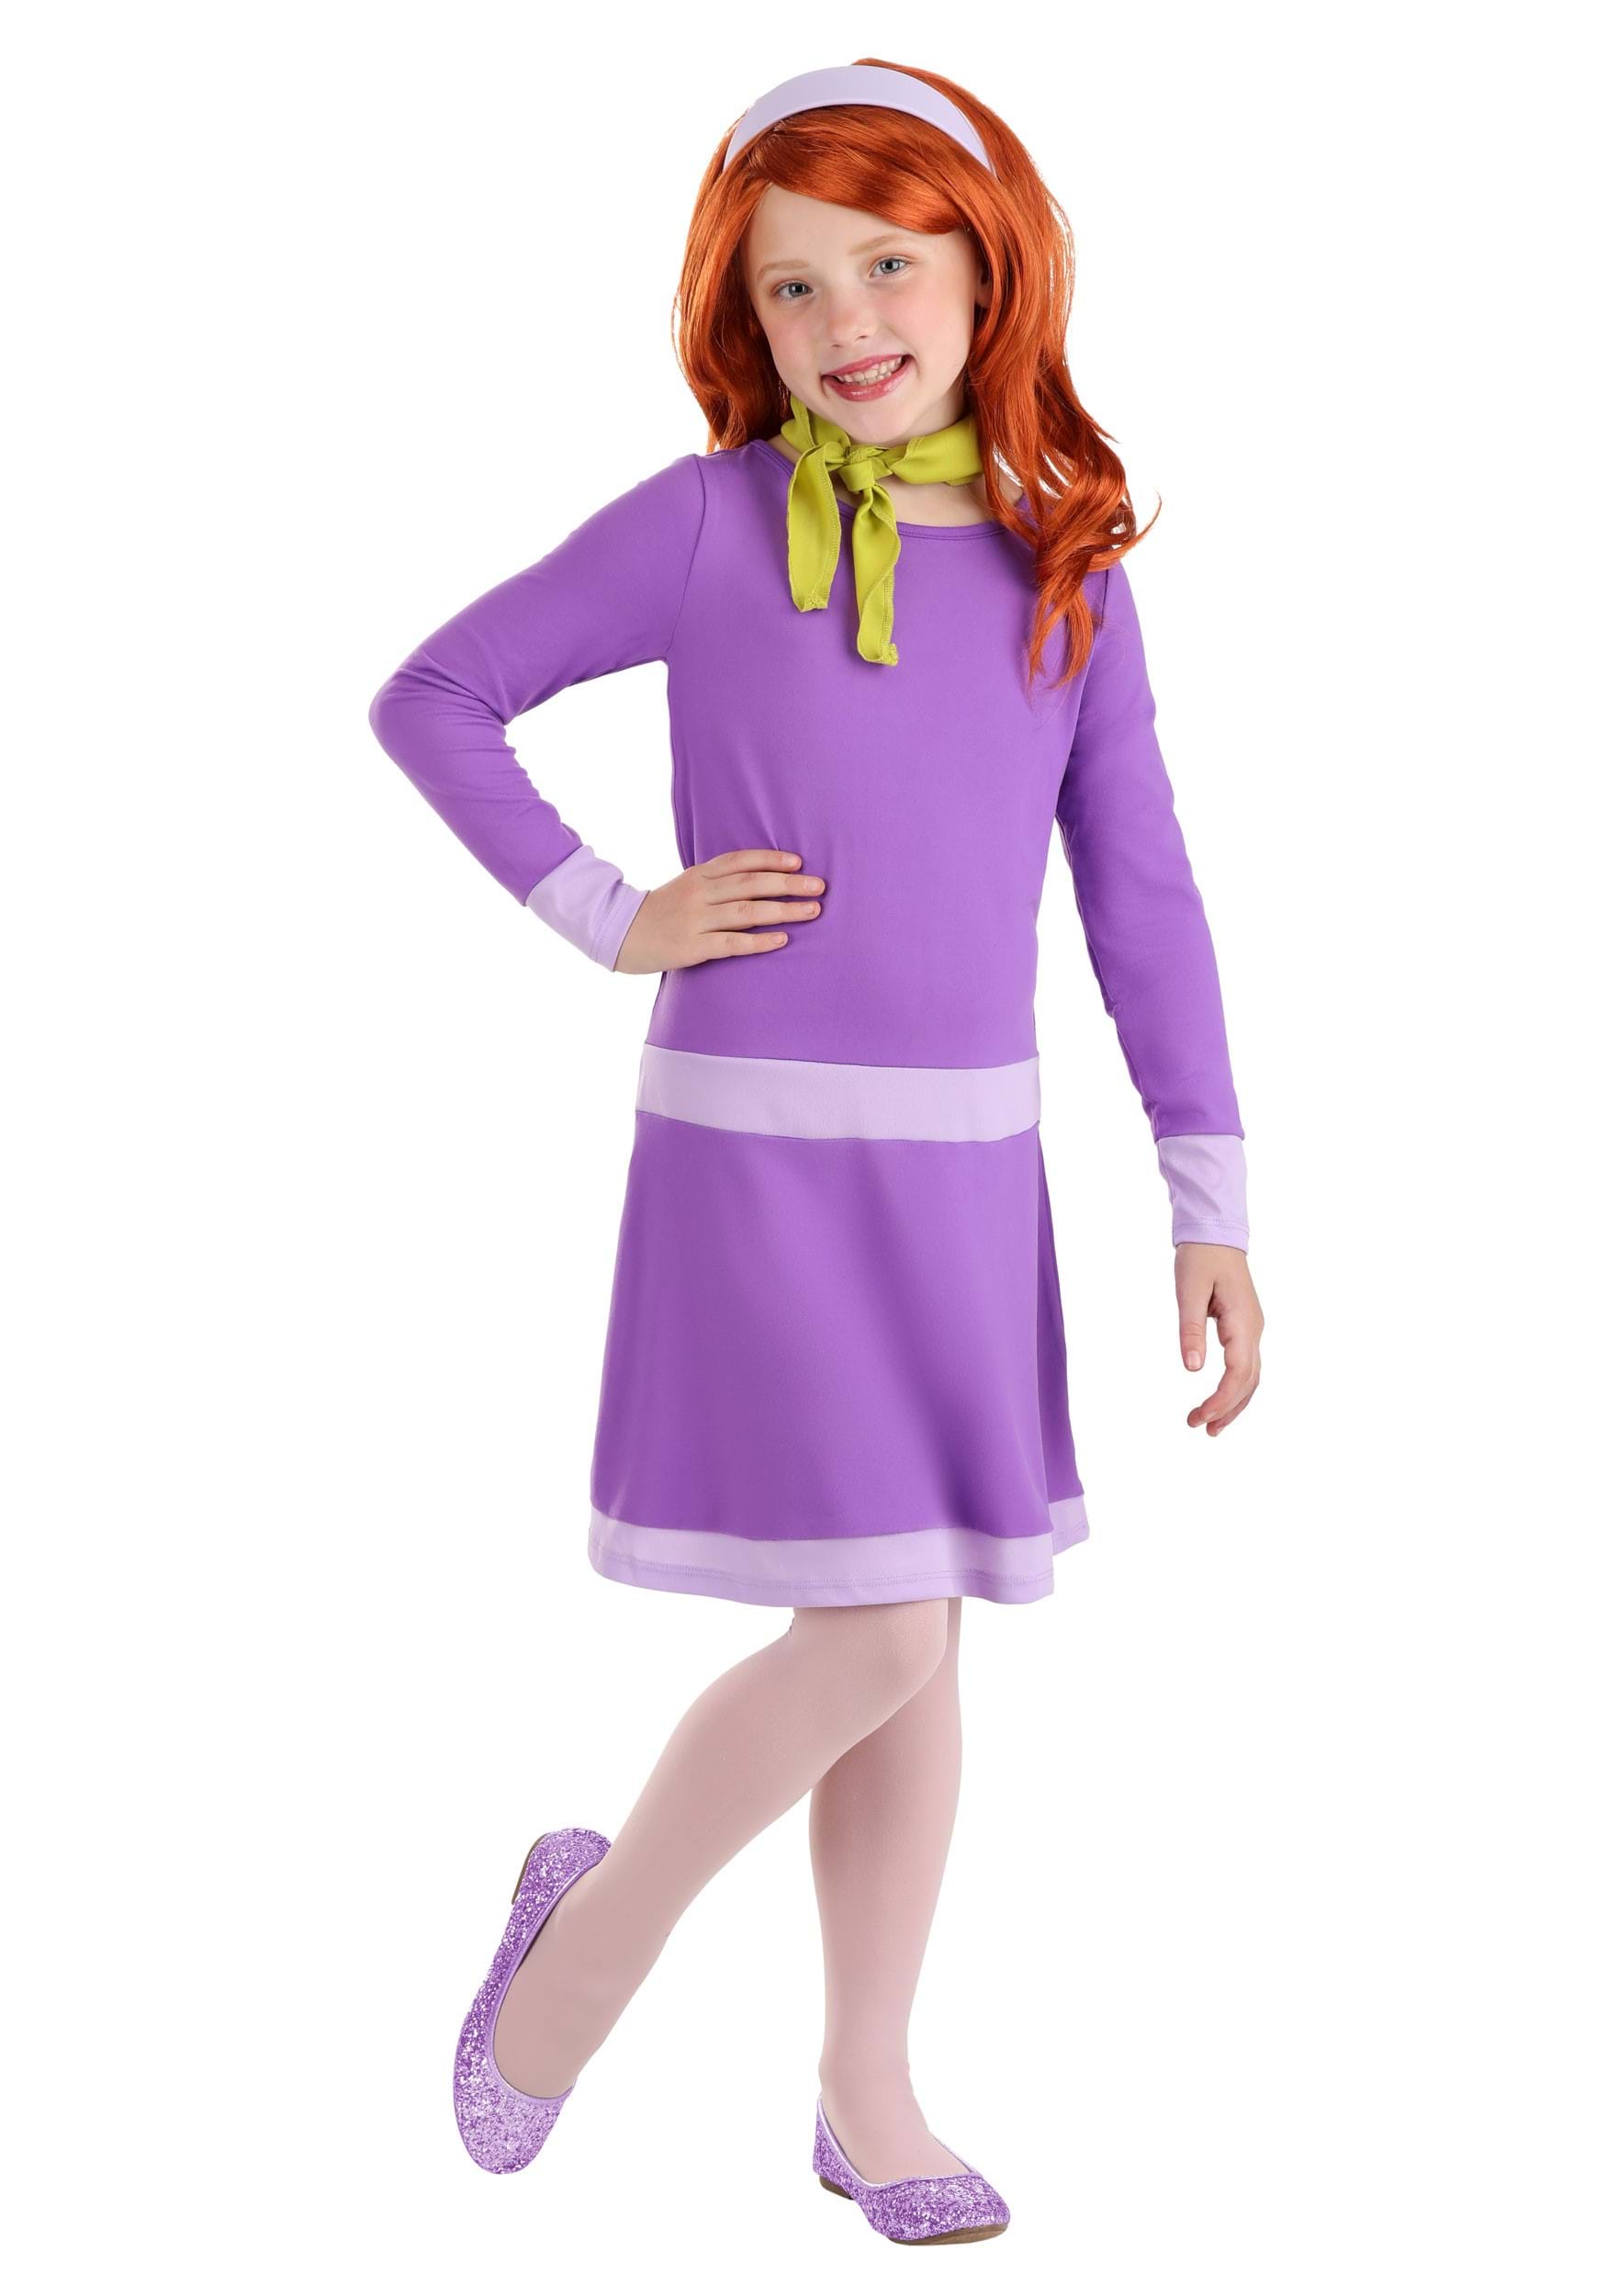 Photos - Fancy Dress FUN Costumes Scooby Doo Daphne Costume for Kids | Exclusive Costumes Green